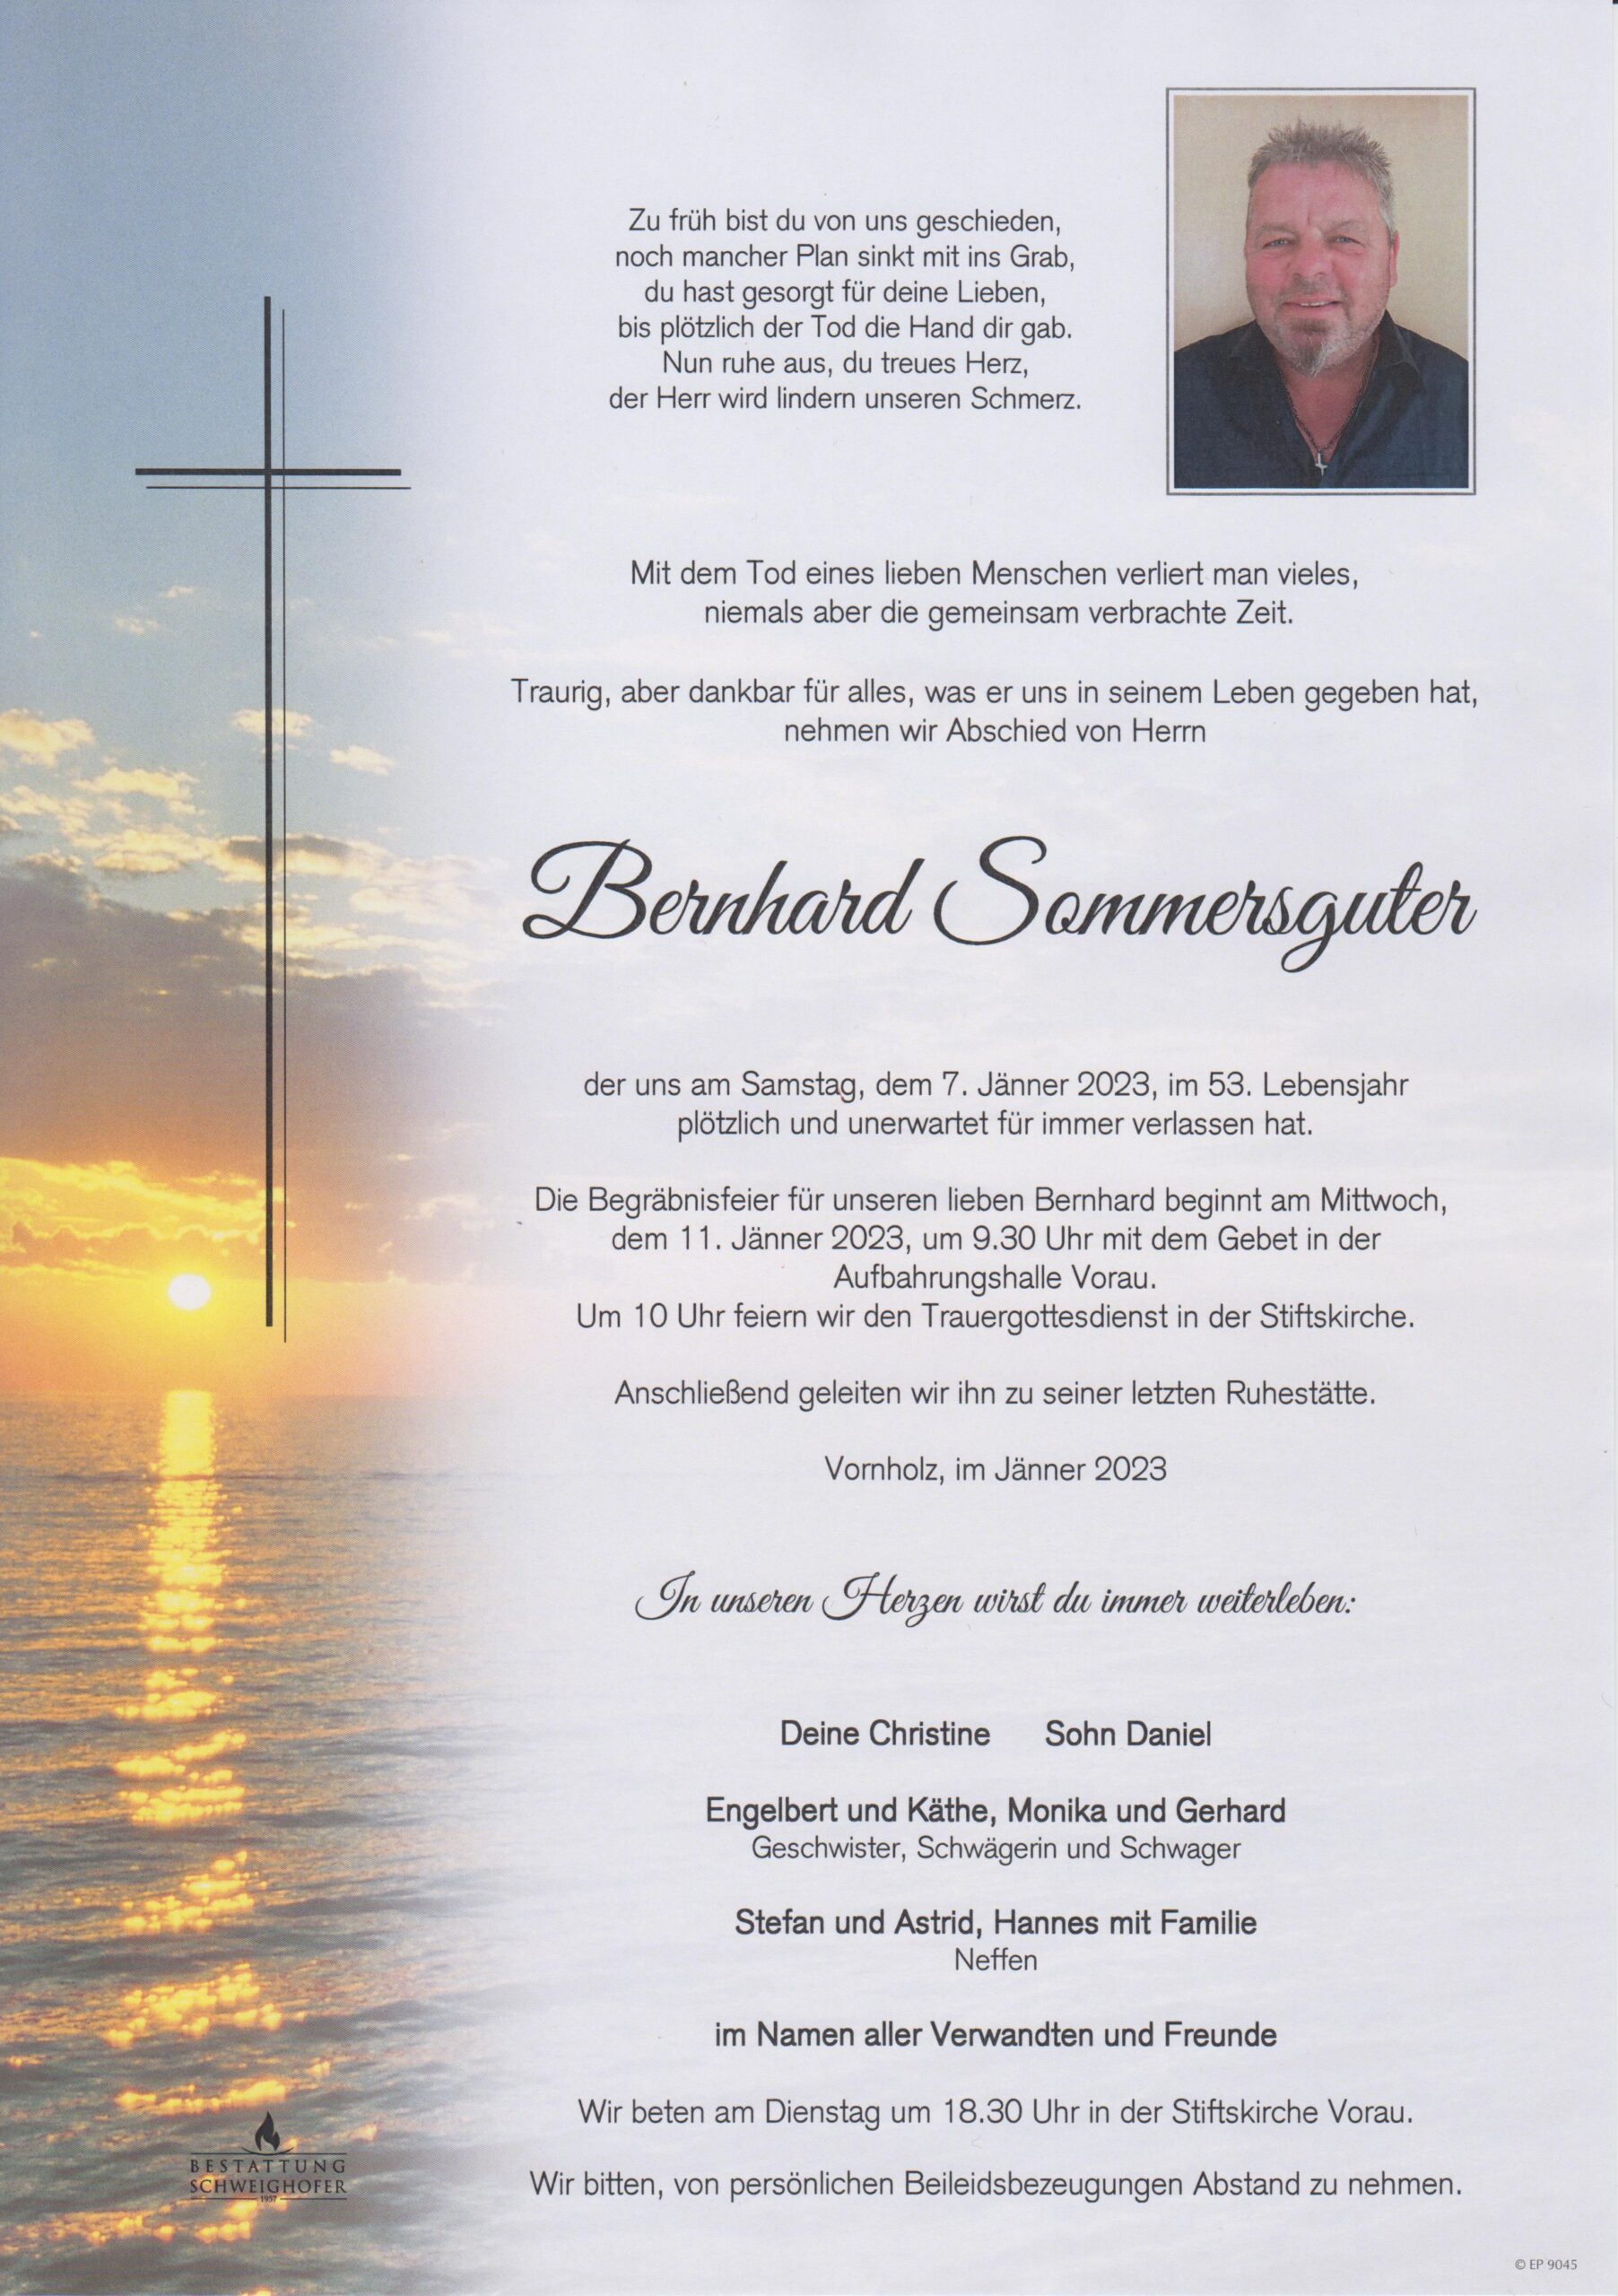 You are currently viewing Bernhard Sommersguter